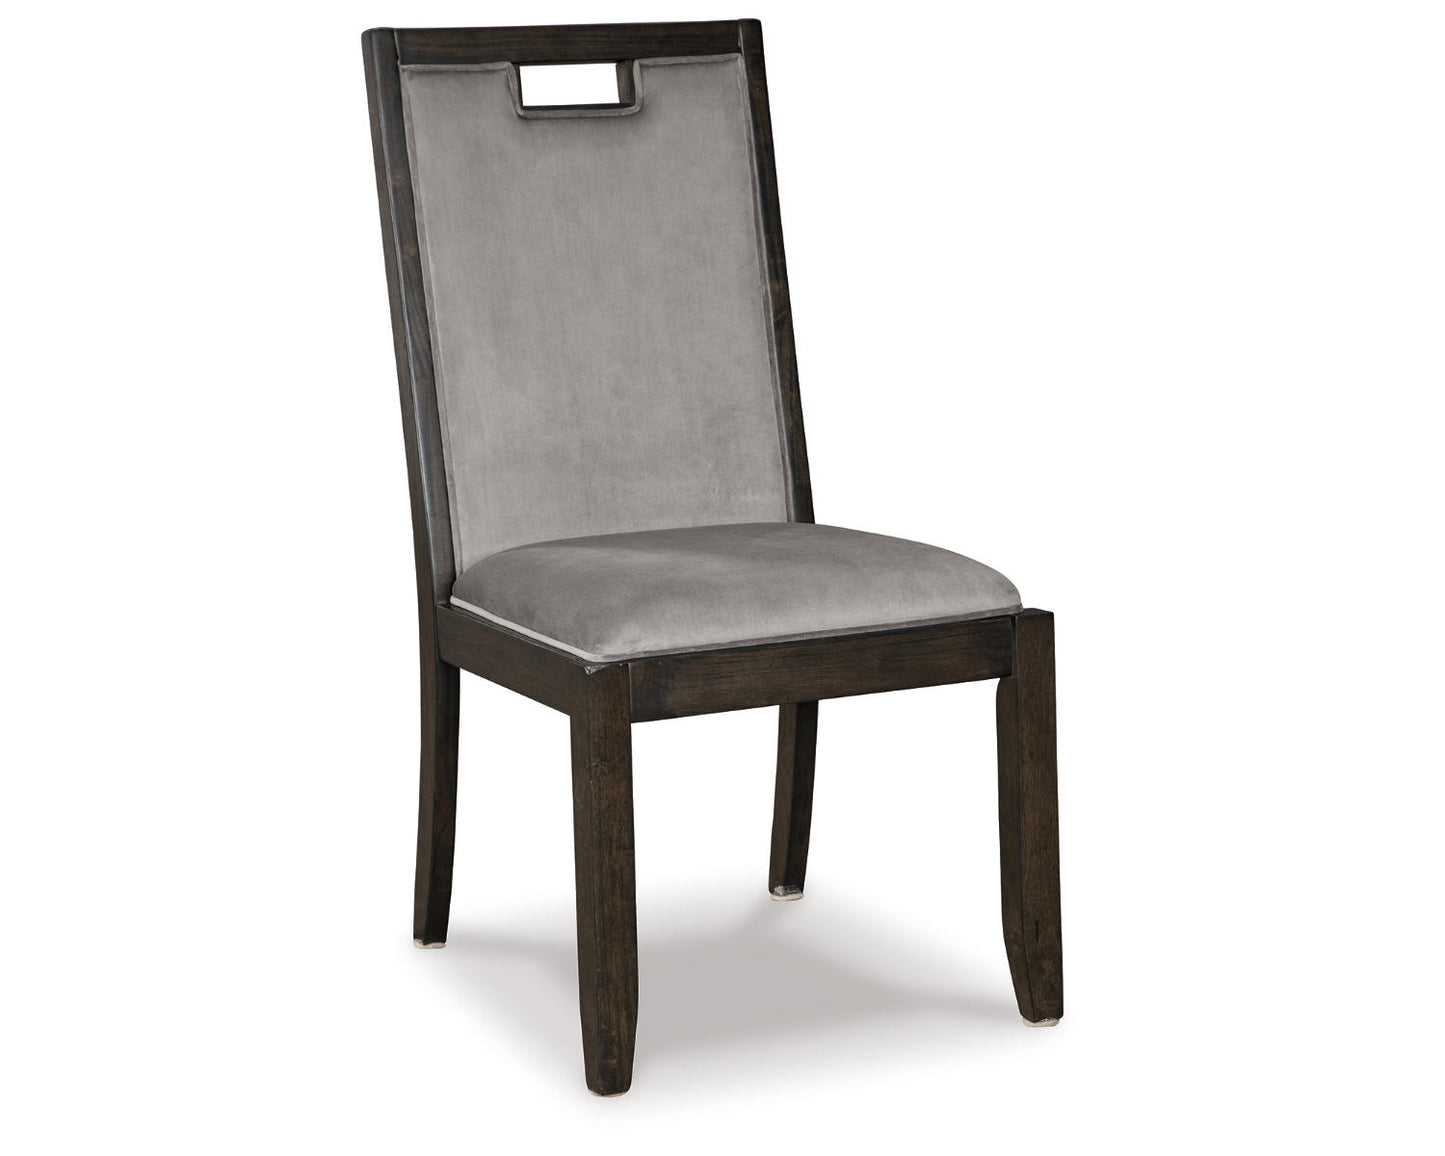 Ashley Signature Design Hyndell Dining Chair Black/Gray;Brown/Beige D731-01